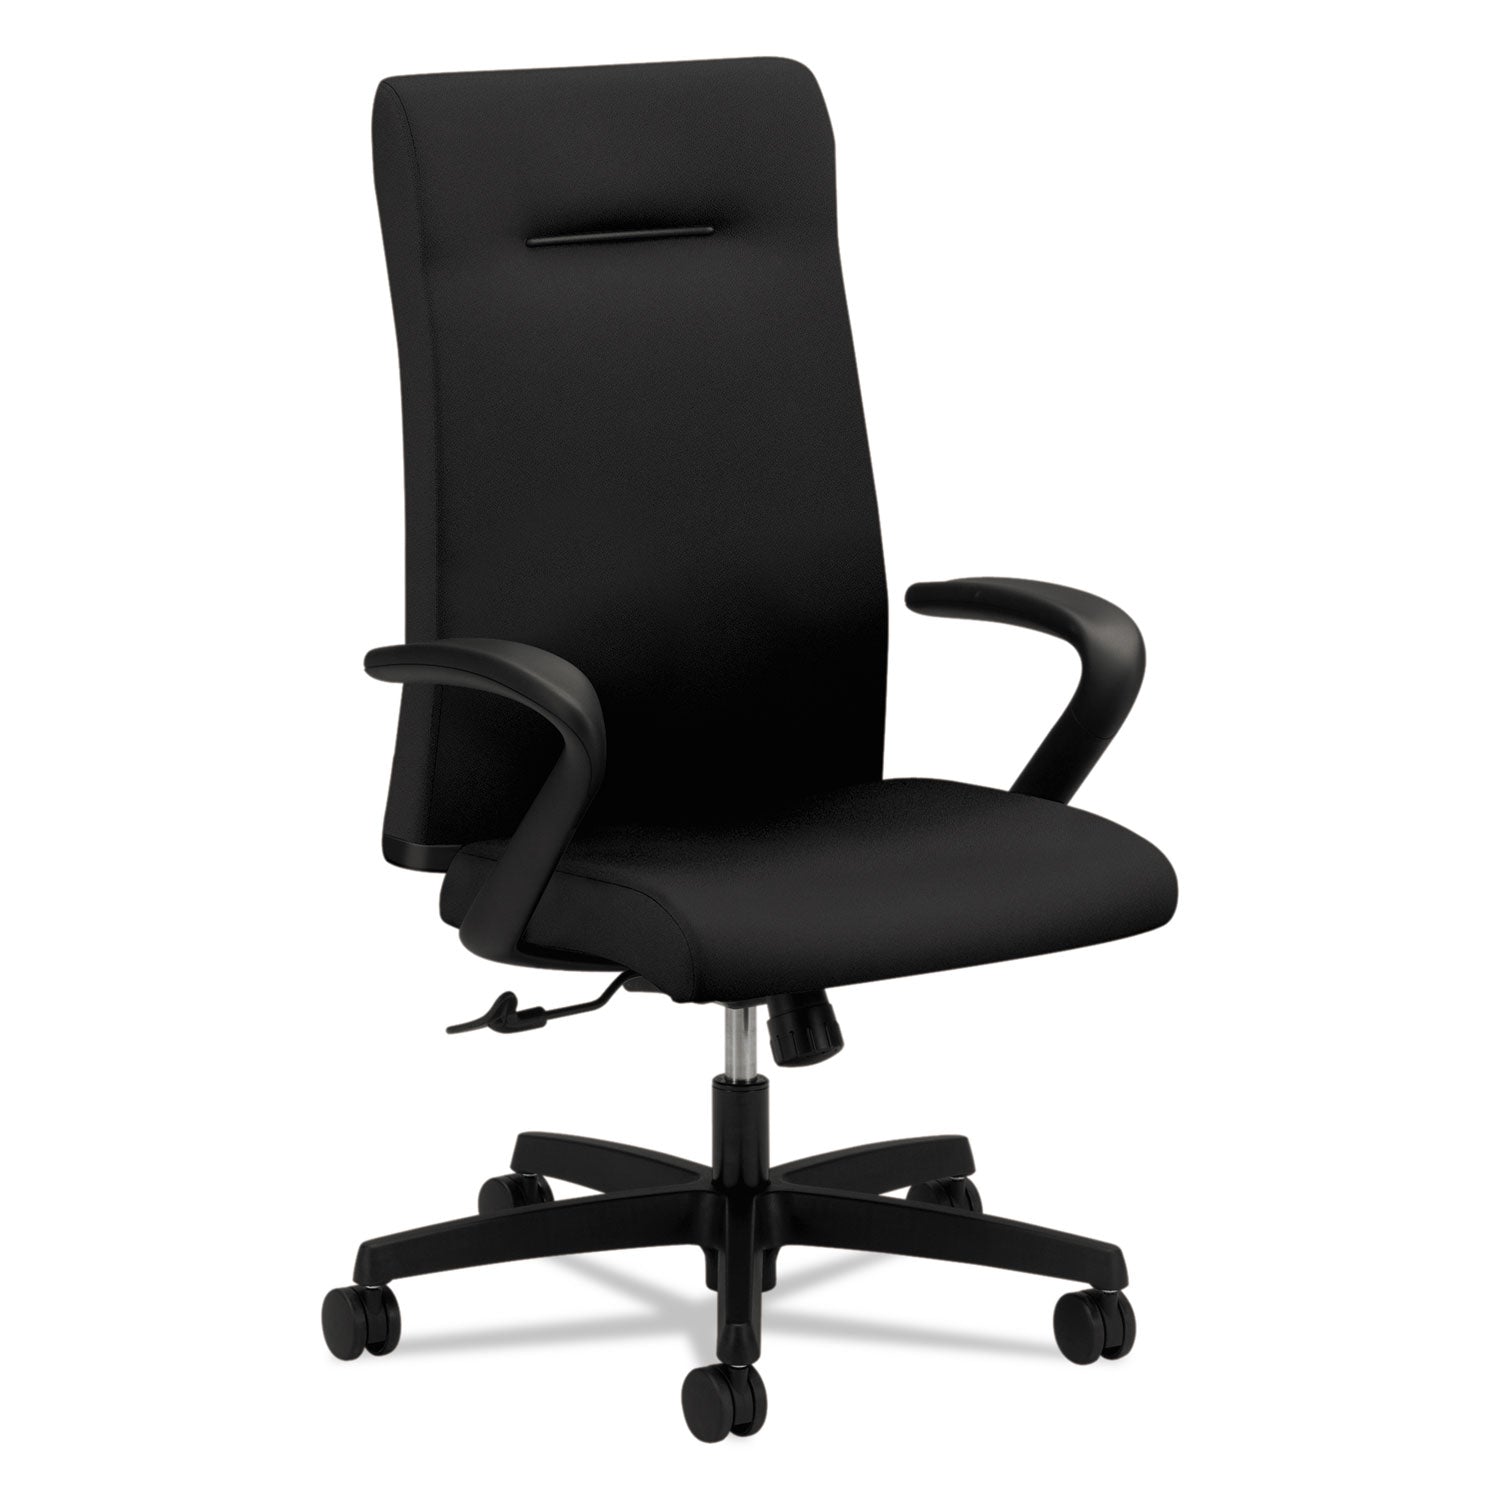 ignition-series-executive-high-back-chair-supports-up-to-300-lb-17-to-21-seat-height-black_honie102cu10 - 1